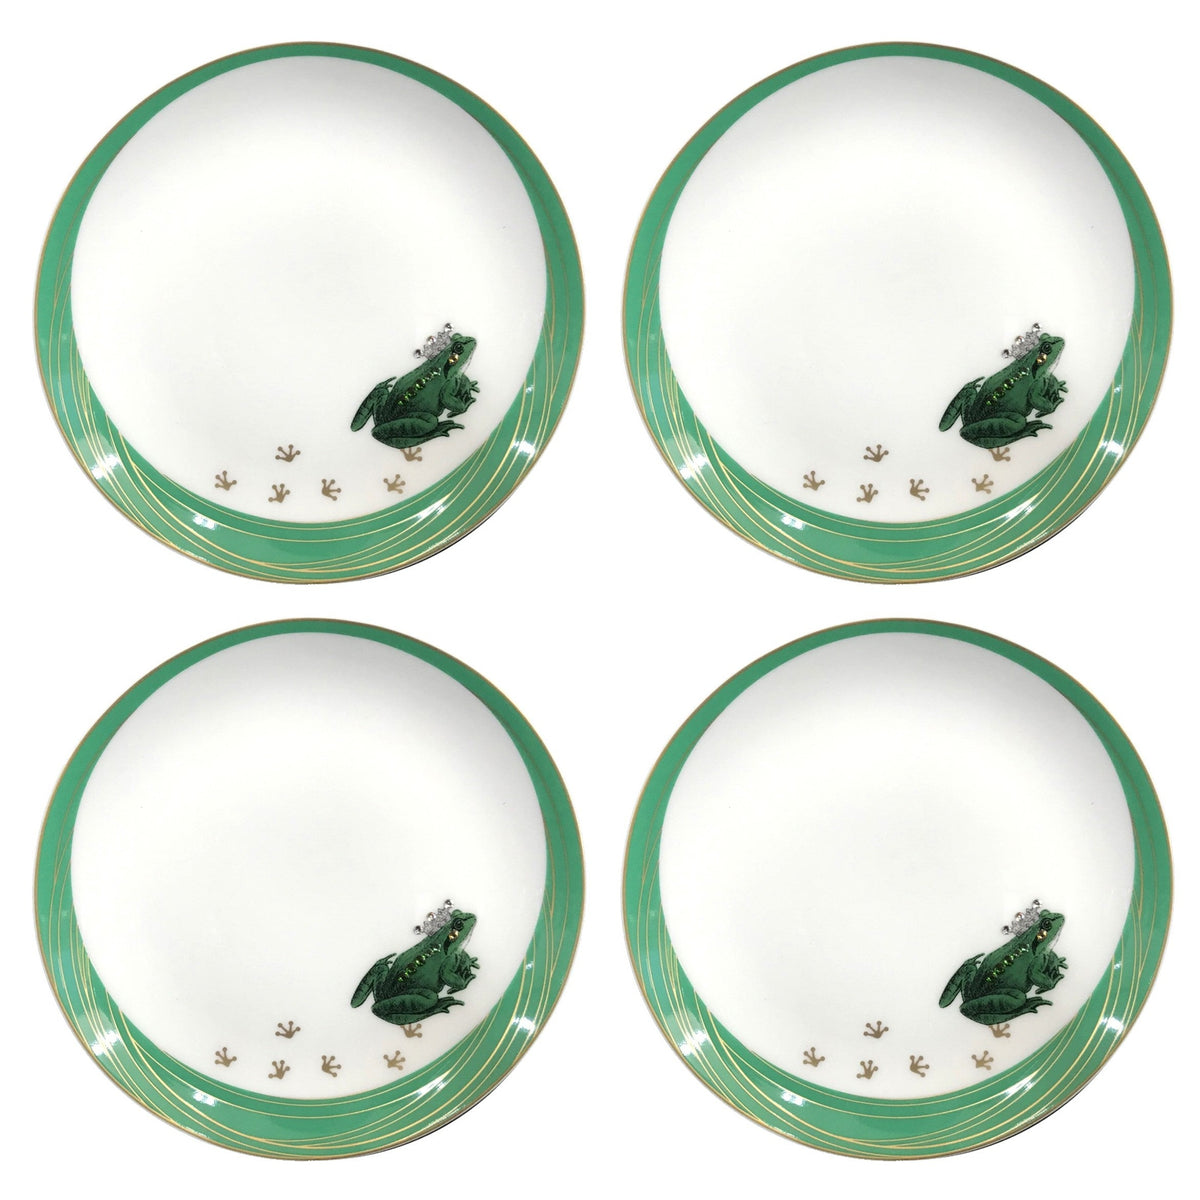 My Frog Prince - Small Jewelry Tray/Coaster, Set of 4